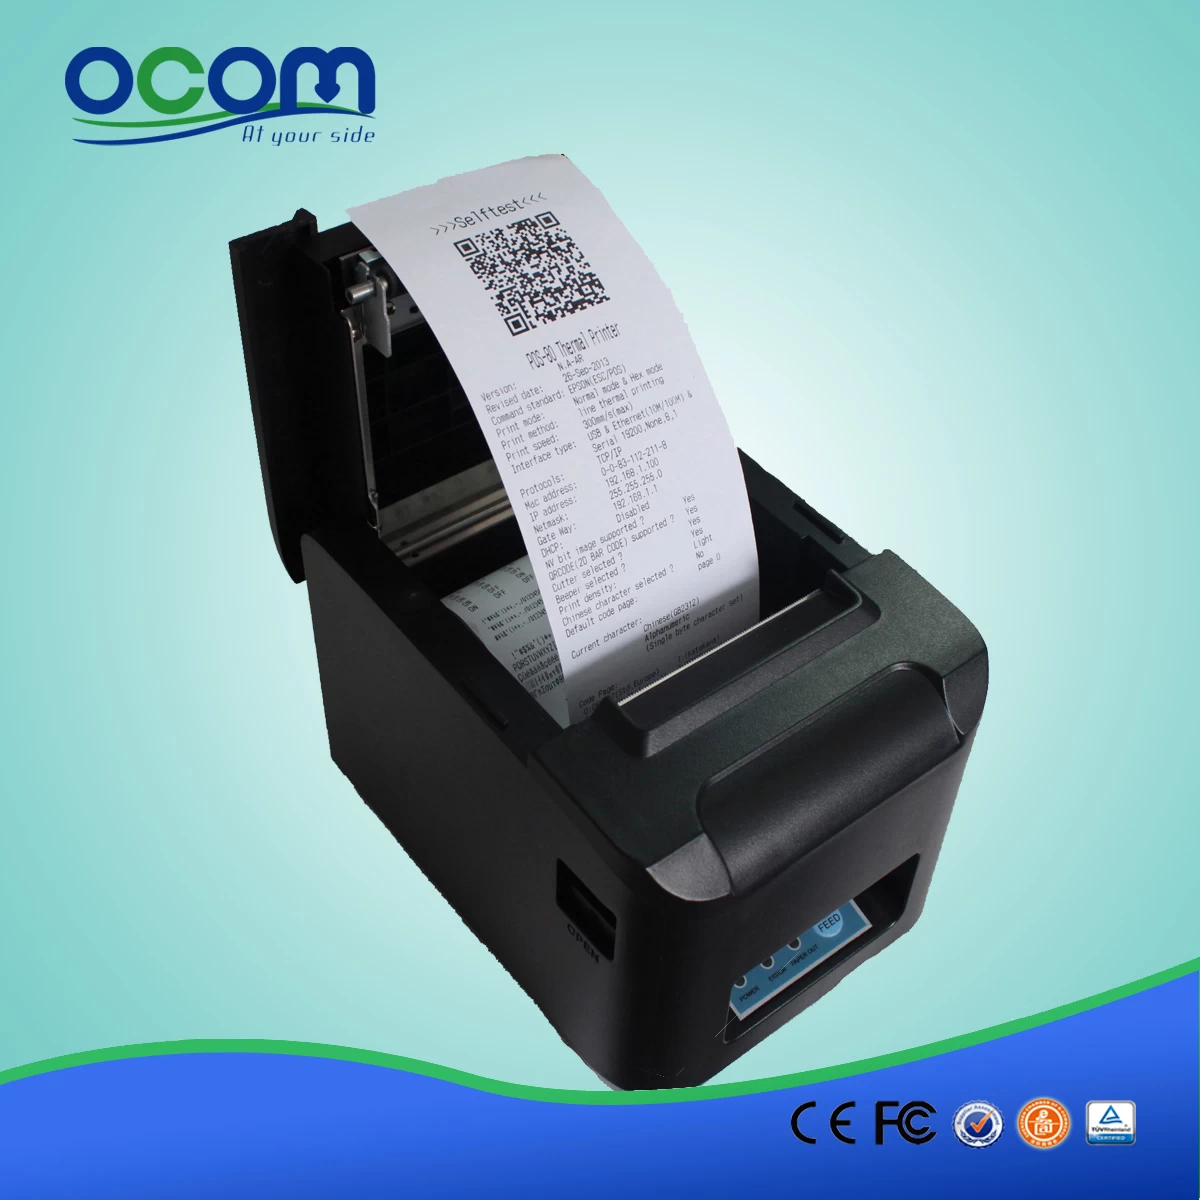 80mm High Speed With Auto-cutter Pos Thermal Receipt Printer